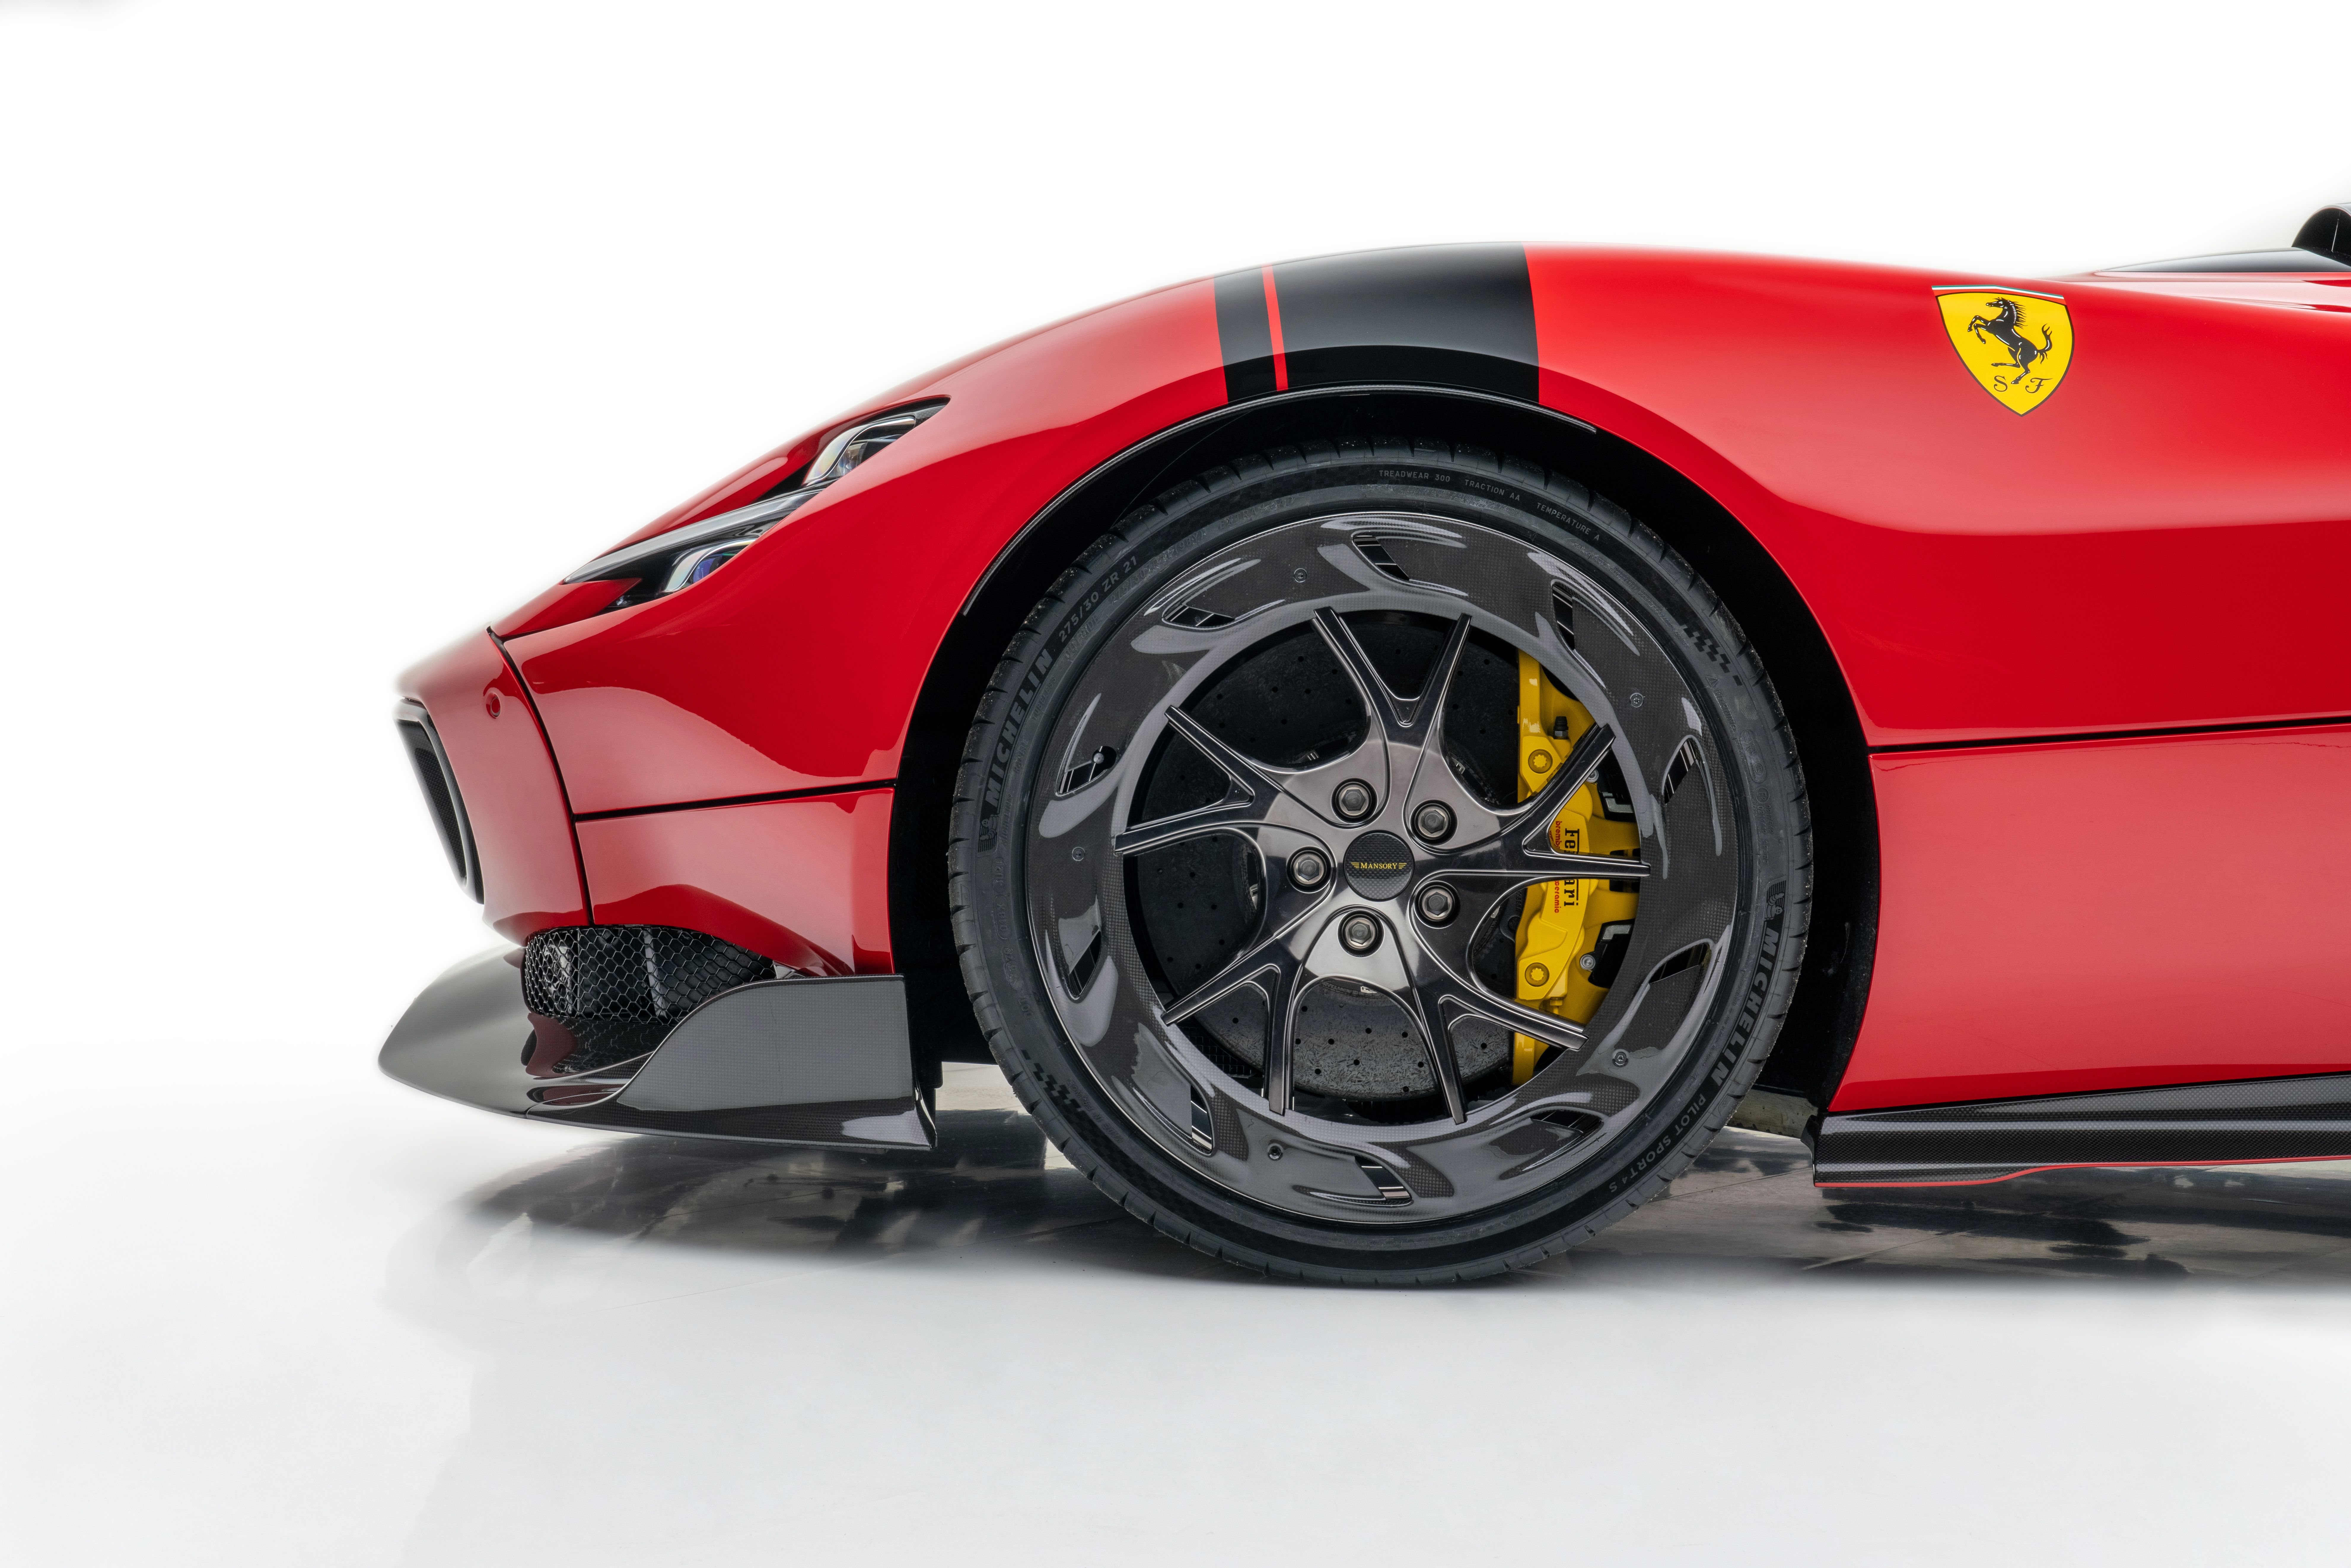 2022 Red Mansory Ferrari Monza SP2 21-inch Forged Wheels